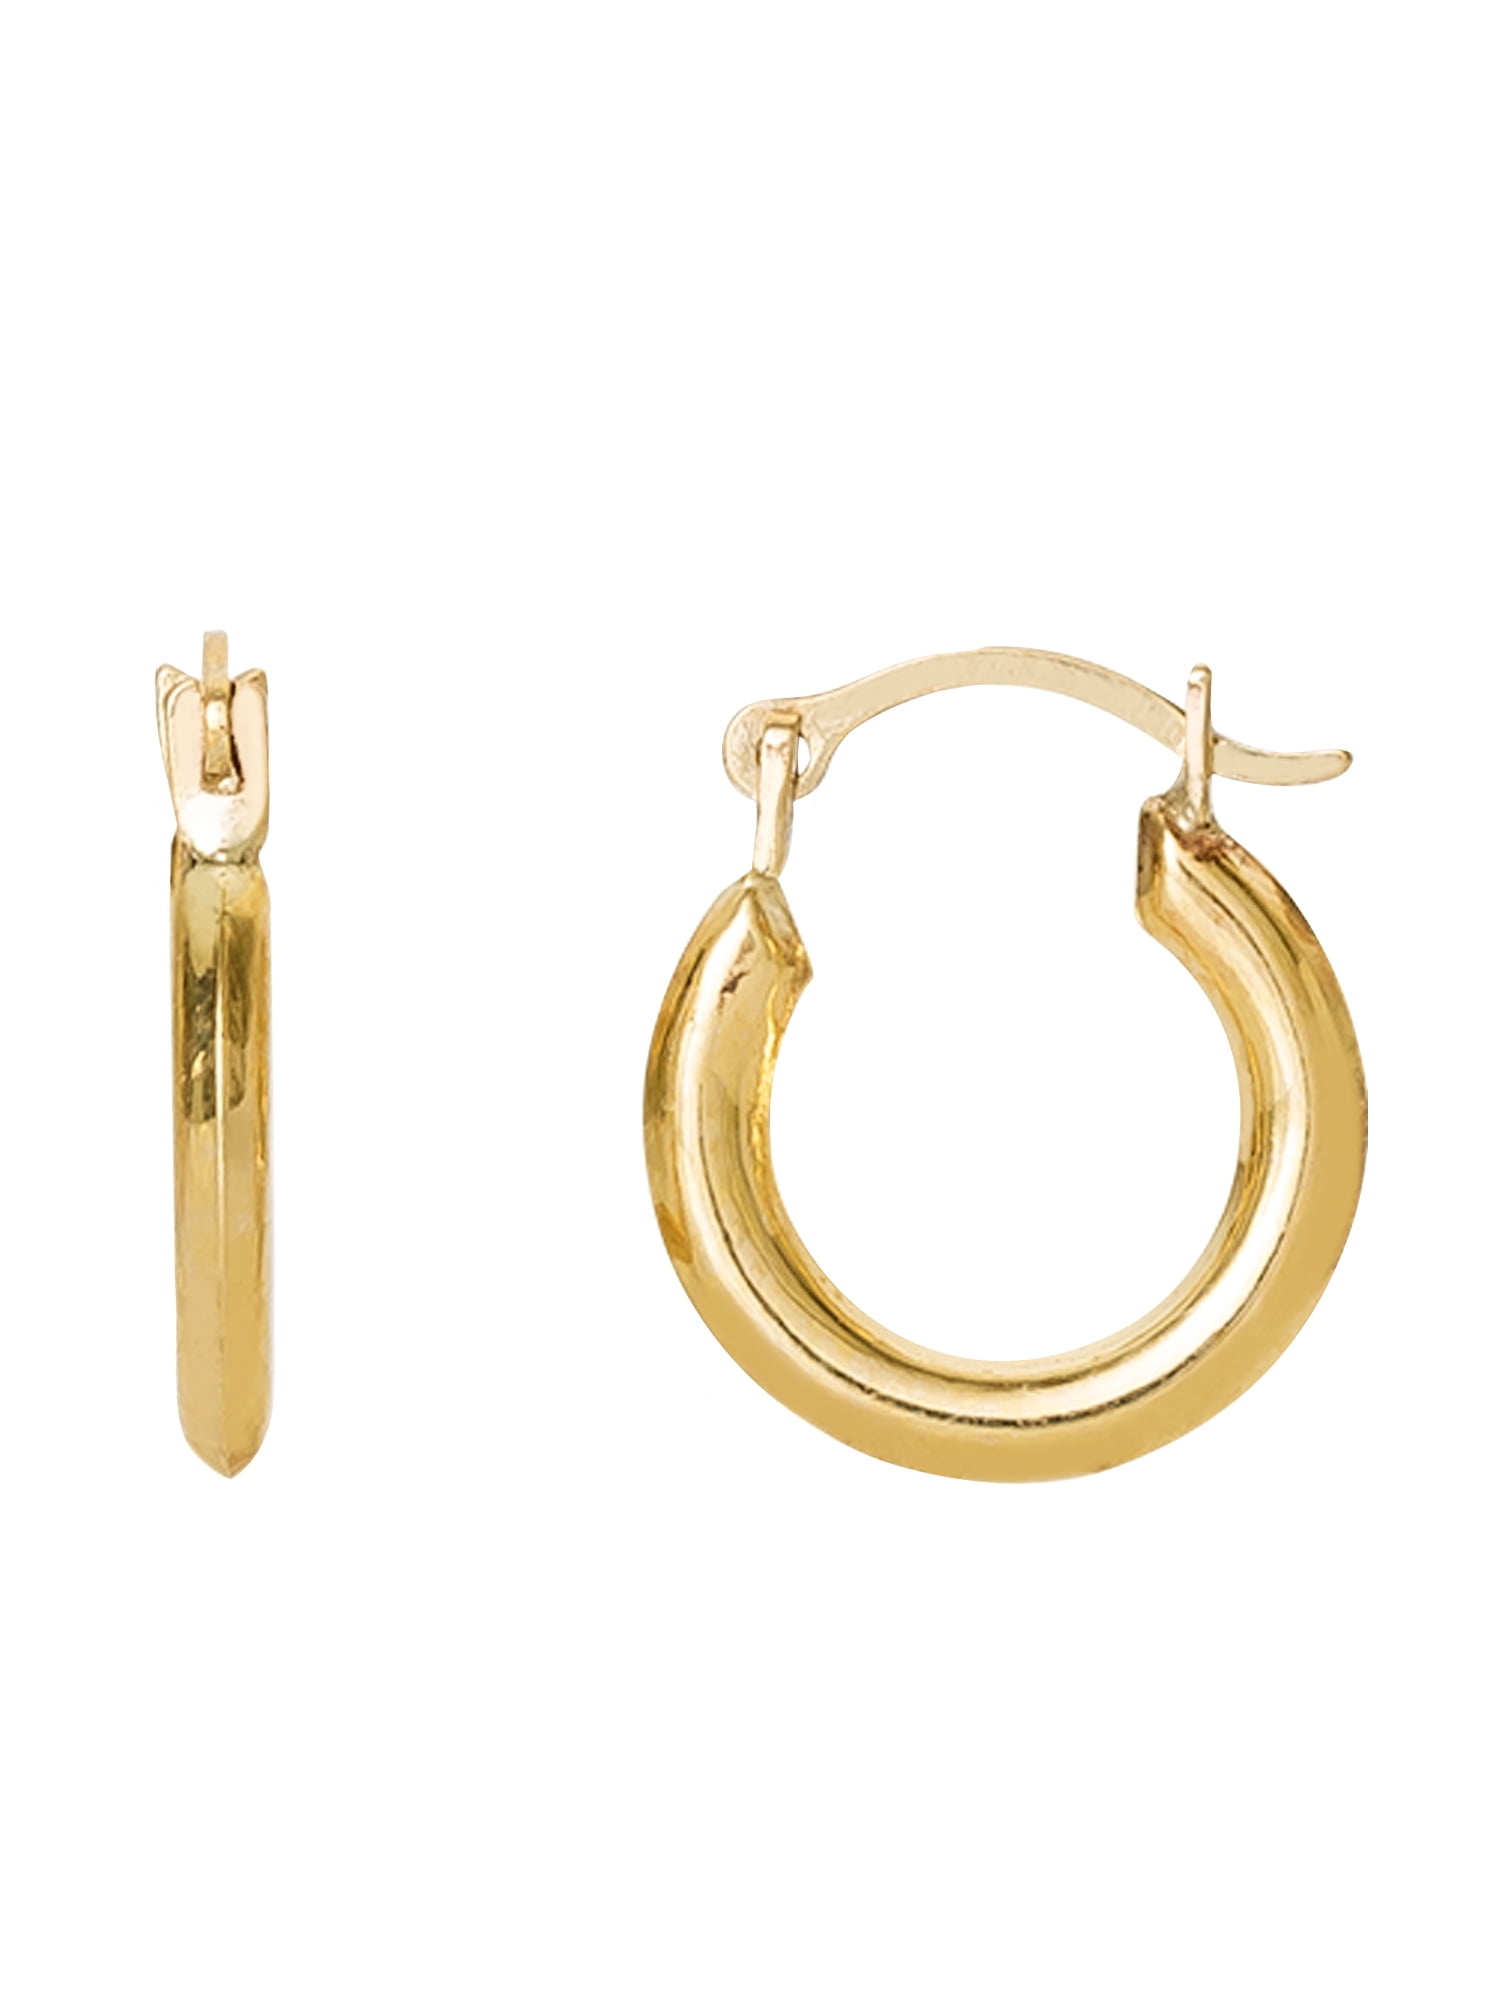 Kids Collection - Kids Collection 14kt Yellow Gold Small Hoop Earrings ...